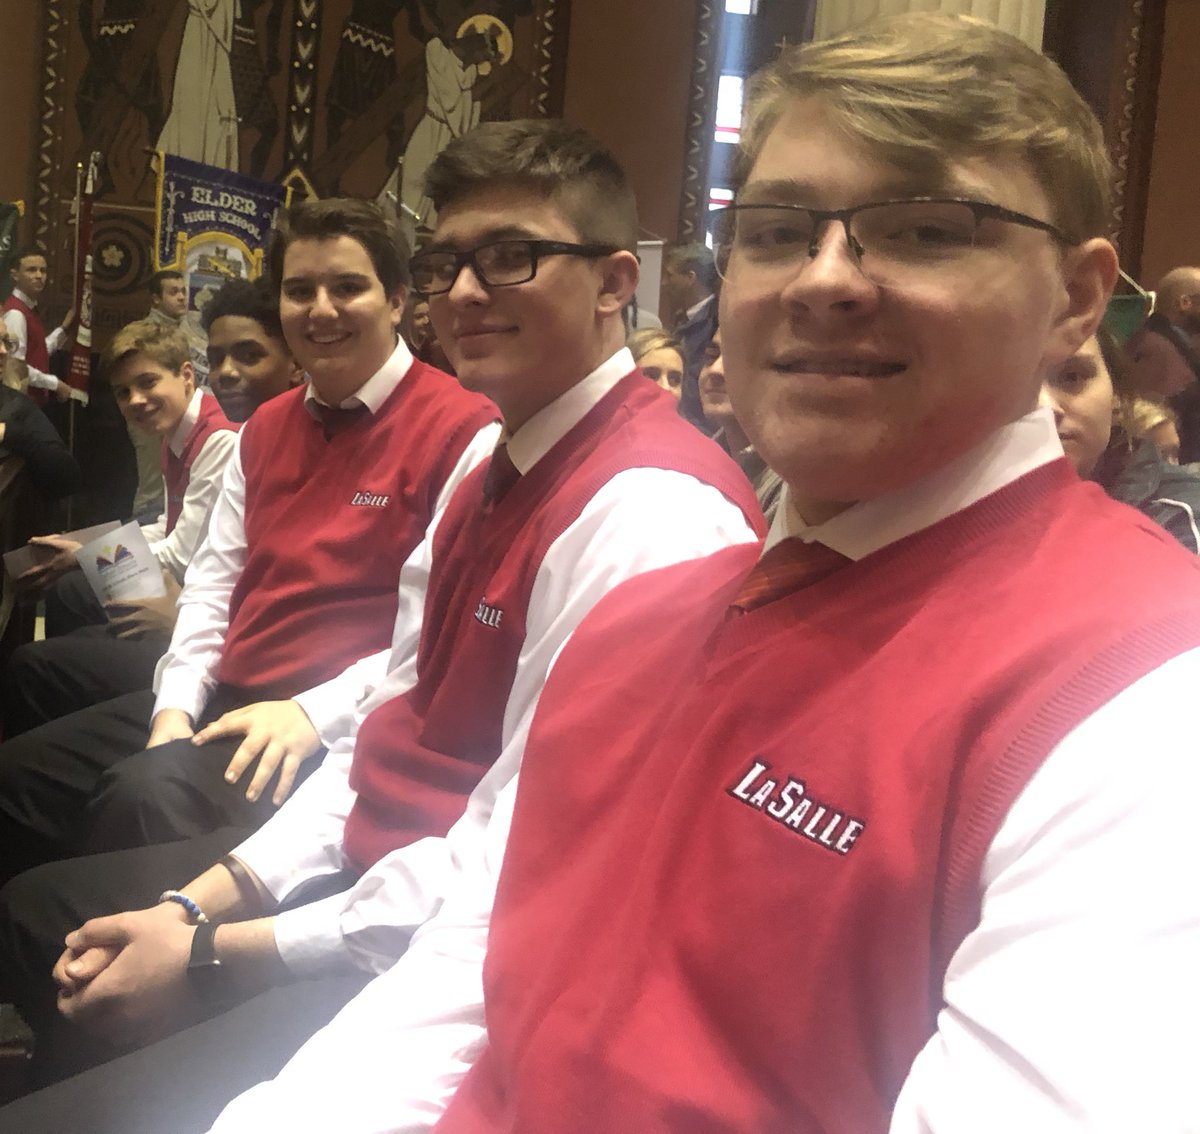 Had a great day with these young men from @LaSallePride representing our great school at the #CSW2019 Mass. Bishop Joe Binzer is a proud alum of @LaSallePride #LasallianEducation #TransformingLivesSince1680 #LJIOH